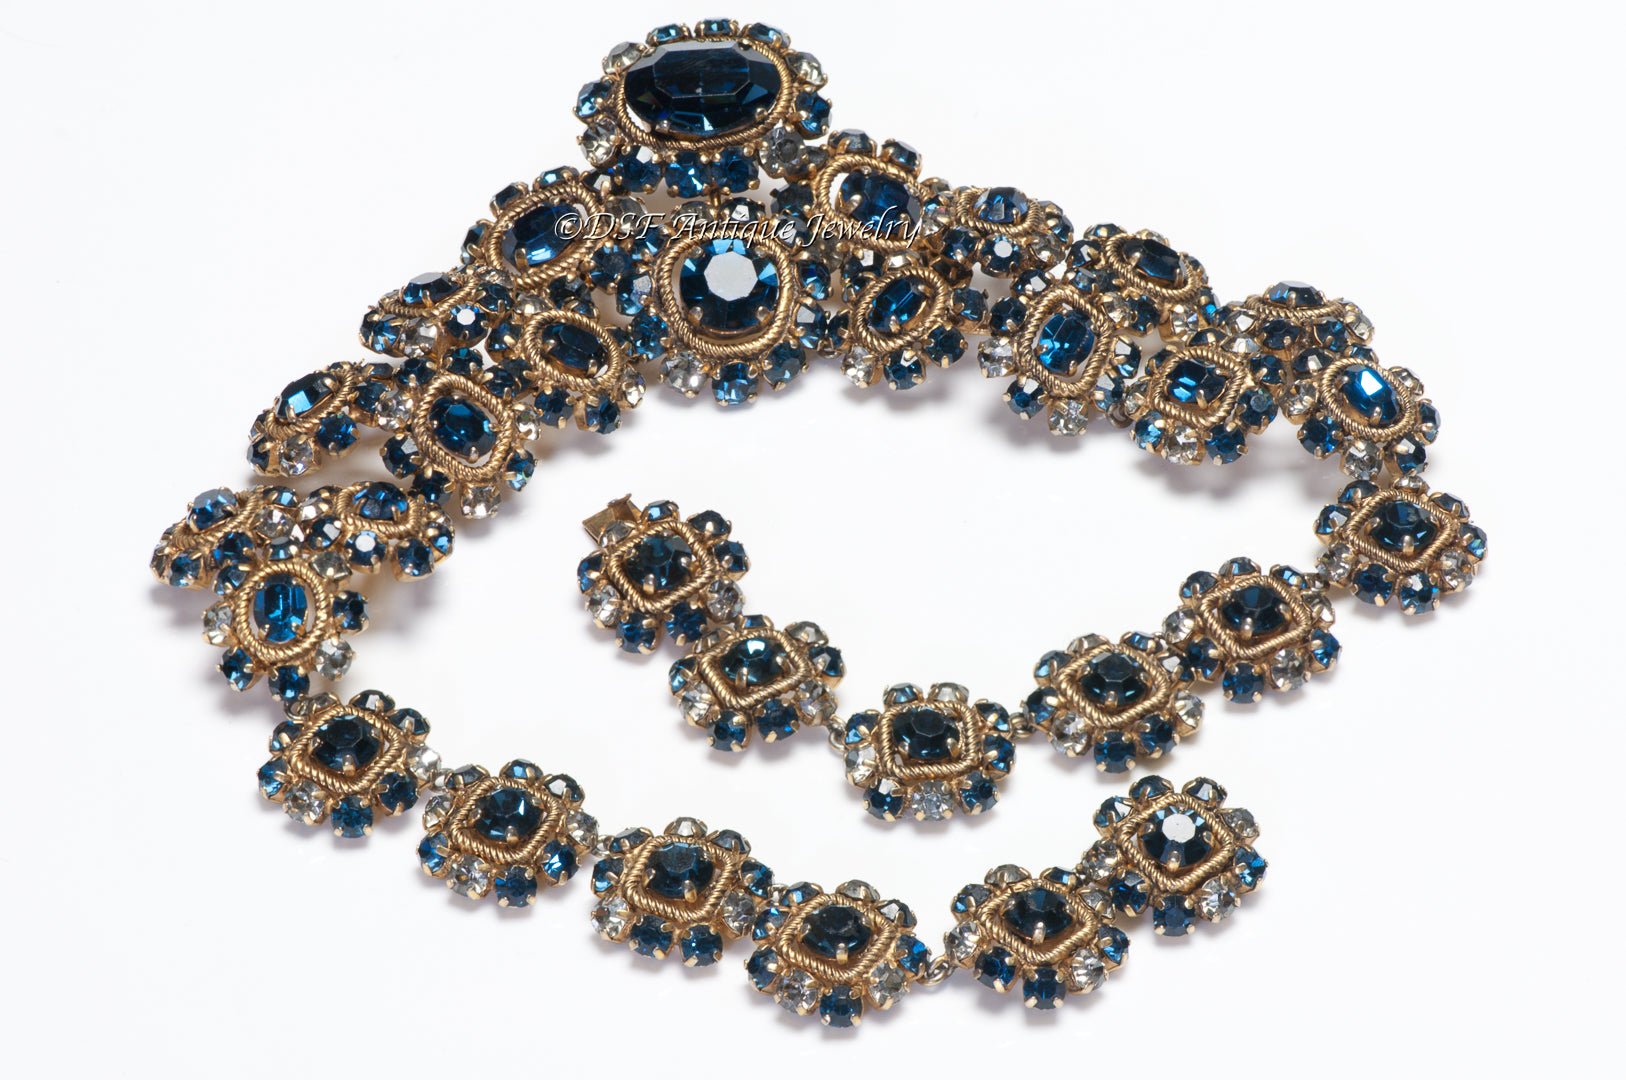 Christian Dior Paris Couture 1964 Henkel & Grosse Blue Crystal Collar Necklace